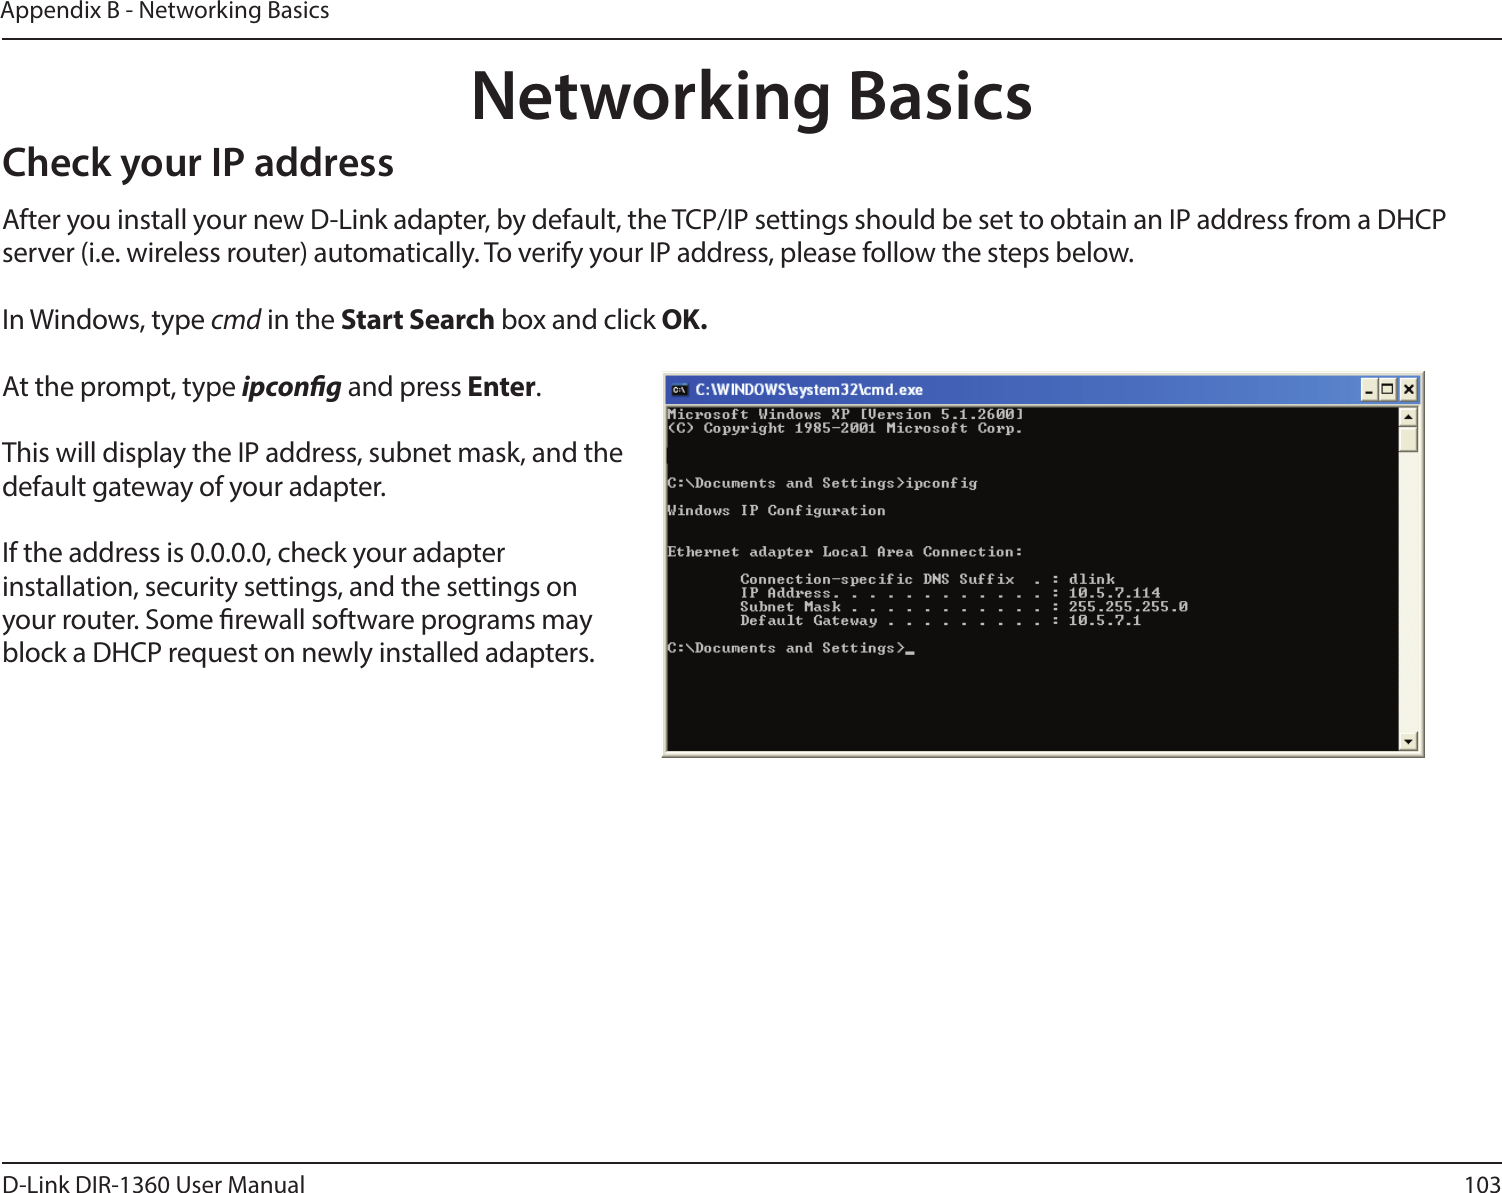 103D-Link DIR-1360 User ManualAppendix B - Networking BasicsNetworking BasicsCheck your IP addressAfter you install your new D-Link adapter, by default, the TCP/IP settings should be set to obtain an IP address from a DHCP server (i.e. wireless router) automatically. To verify your IP address, please follow the steps below.In Windows, type cmd in the Start Search box and click OK.At the prompt, type ipcong and press Enter.This will display the IP address, subnet mask, and the default gateway of your adapter.If the address is 0.0.0.0, check your adapter installation, security settings, and the settings on your router. Some rewall software programs may block a DHCP request on newly installed adapters. 